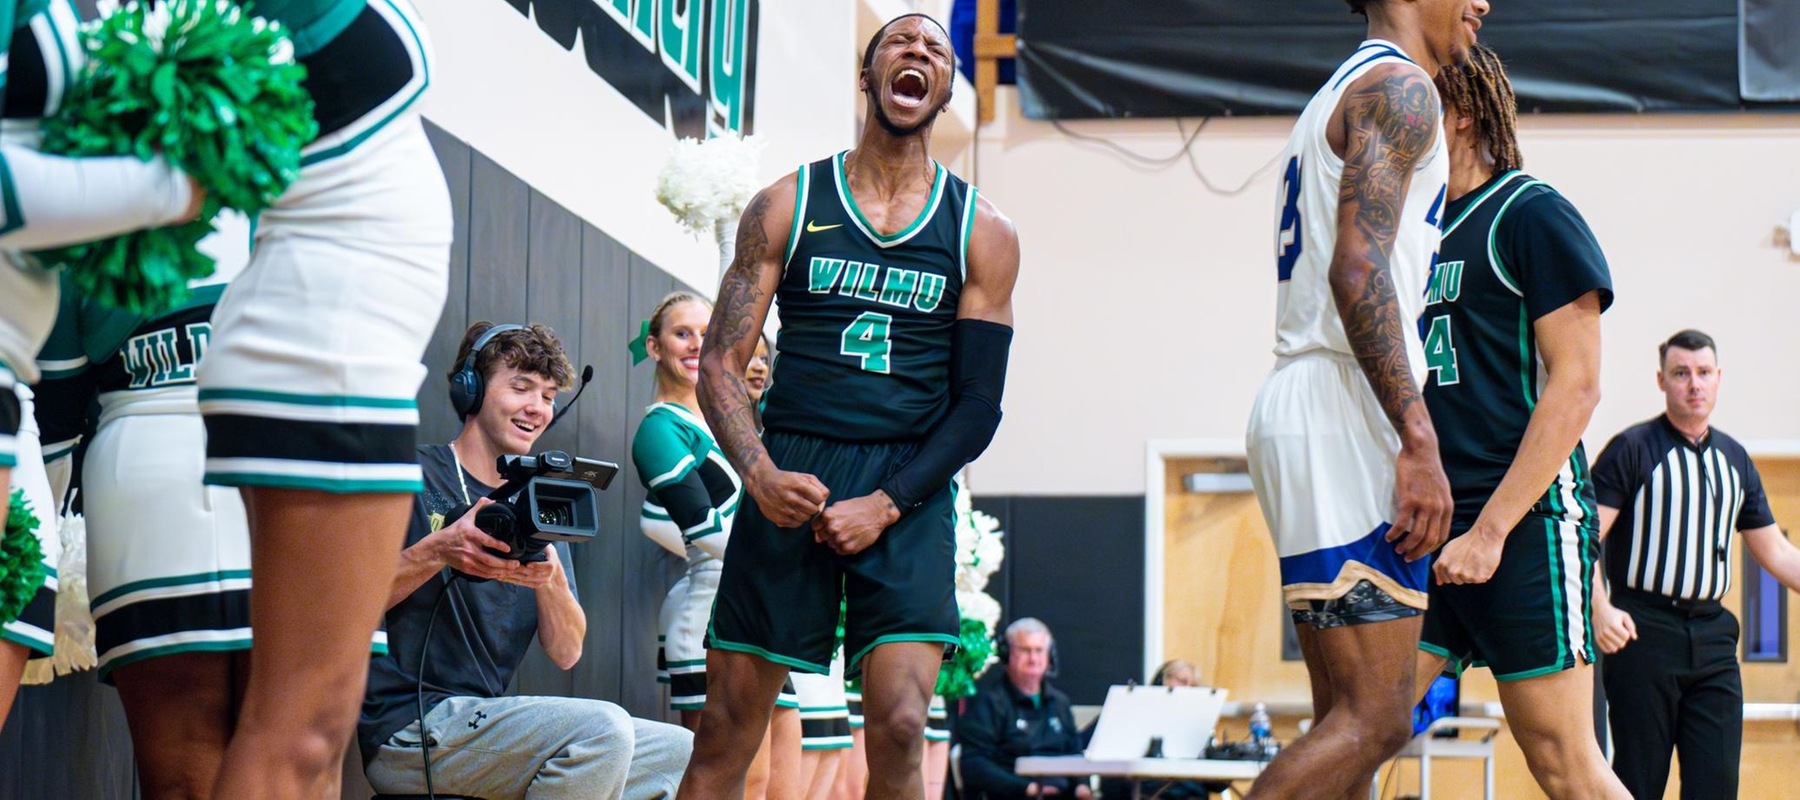 File photo of Taalib Holloman whose 22 points allowed him to cross the 1,000-career point milestone at Goldey-Beacom. Copyright 2024; Wilmington University. All rights reserved. Photo by Giovanni Badalamenti.